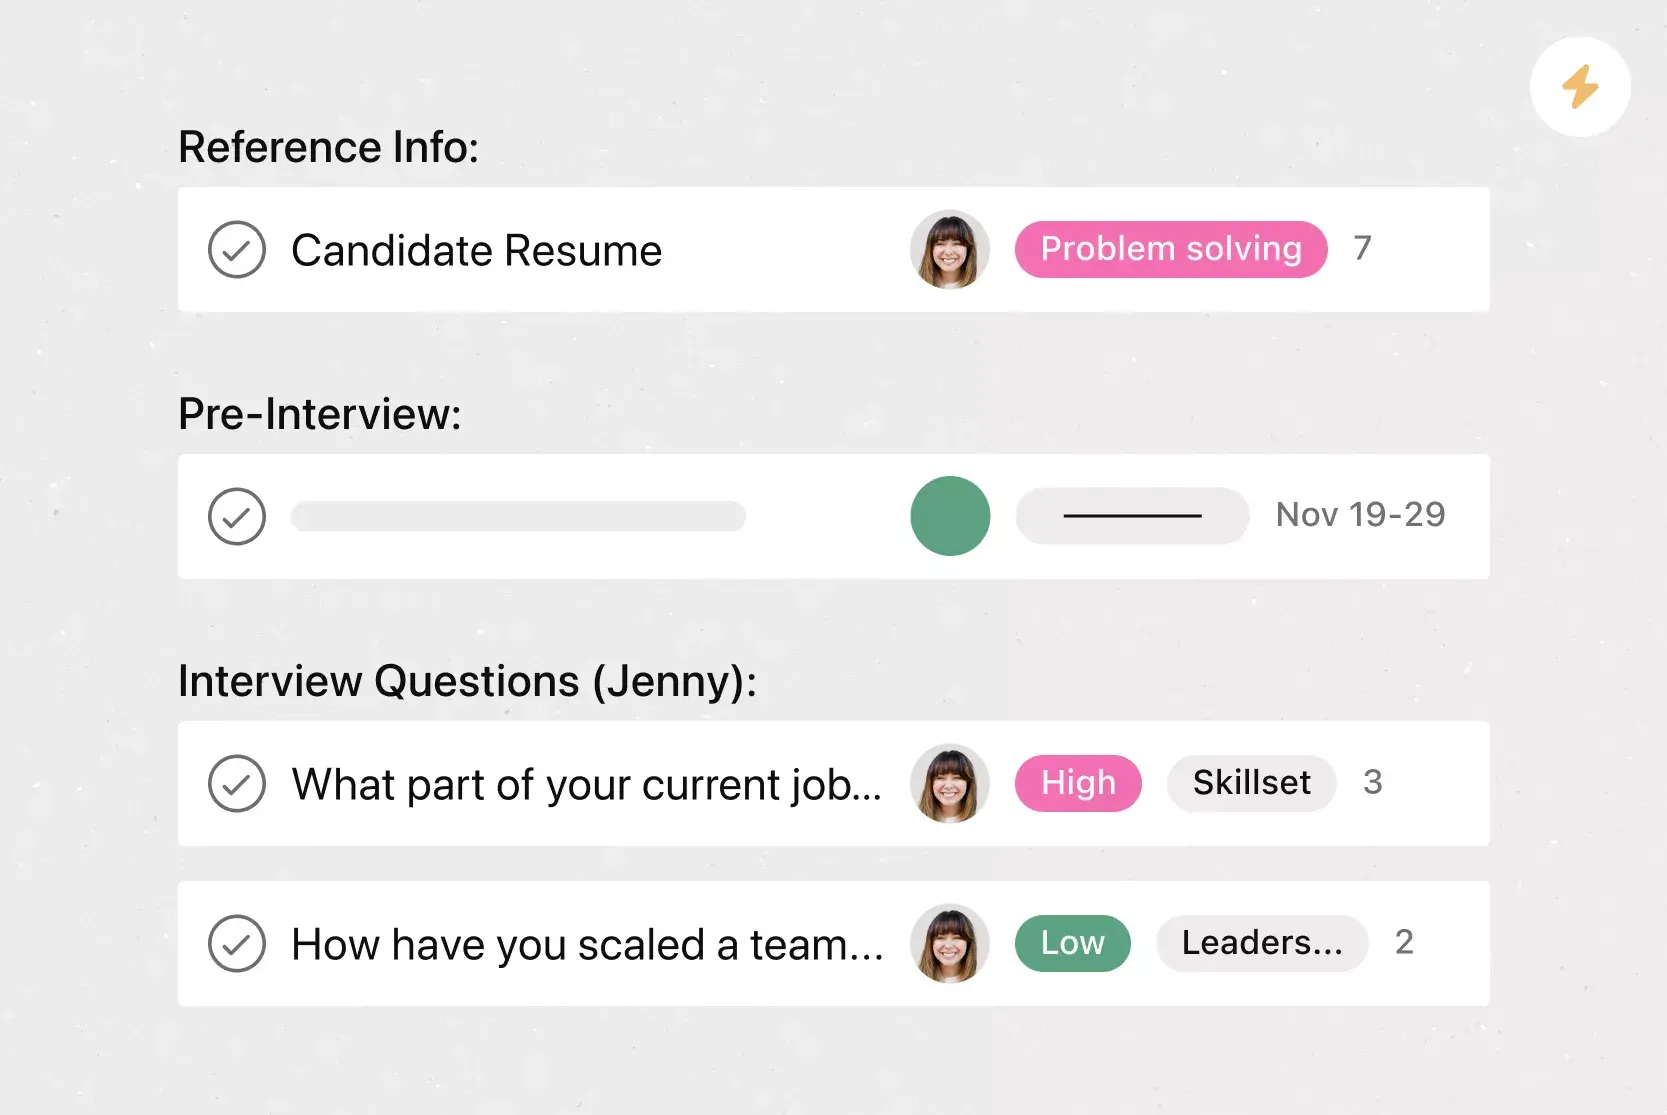 Interview questions and scorecard image